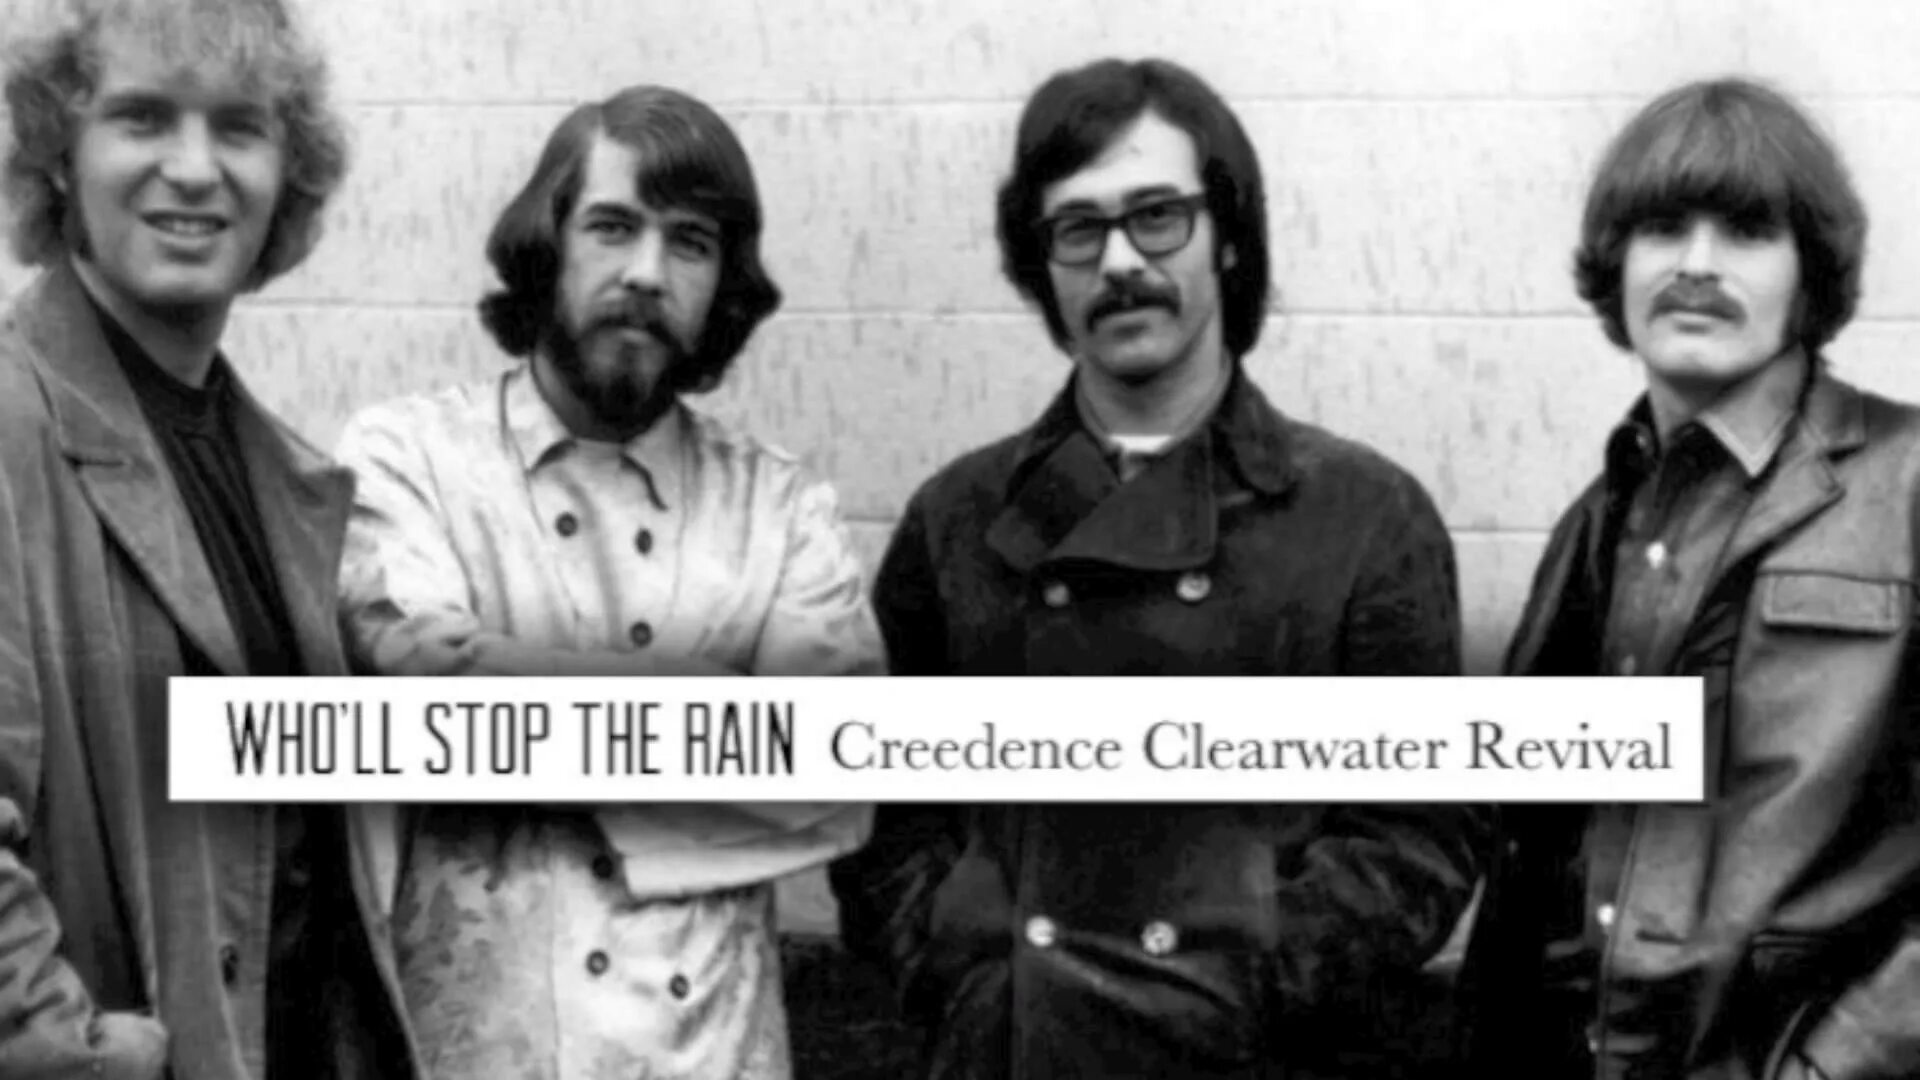 Группа Криденс. Creedence Clearwater Revived 25.02.2020. Криденс Ньюболд. Who stop the Rain Creedence Clearwater Revival. Creedence clearwater revival rain